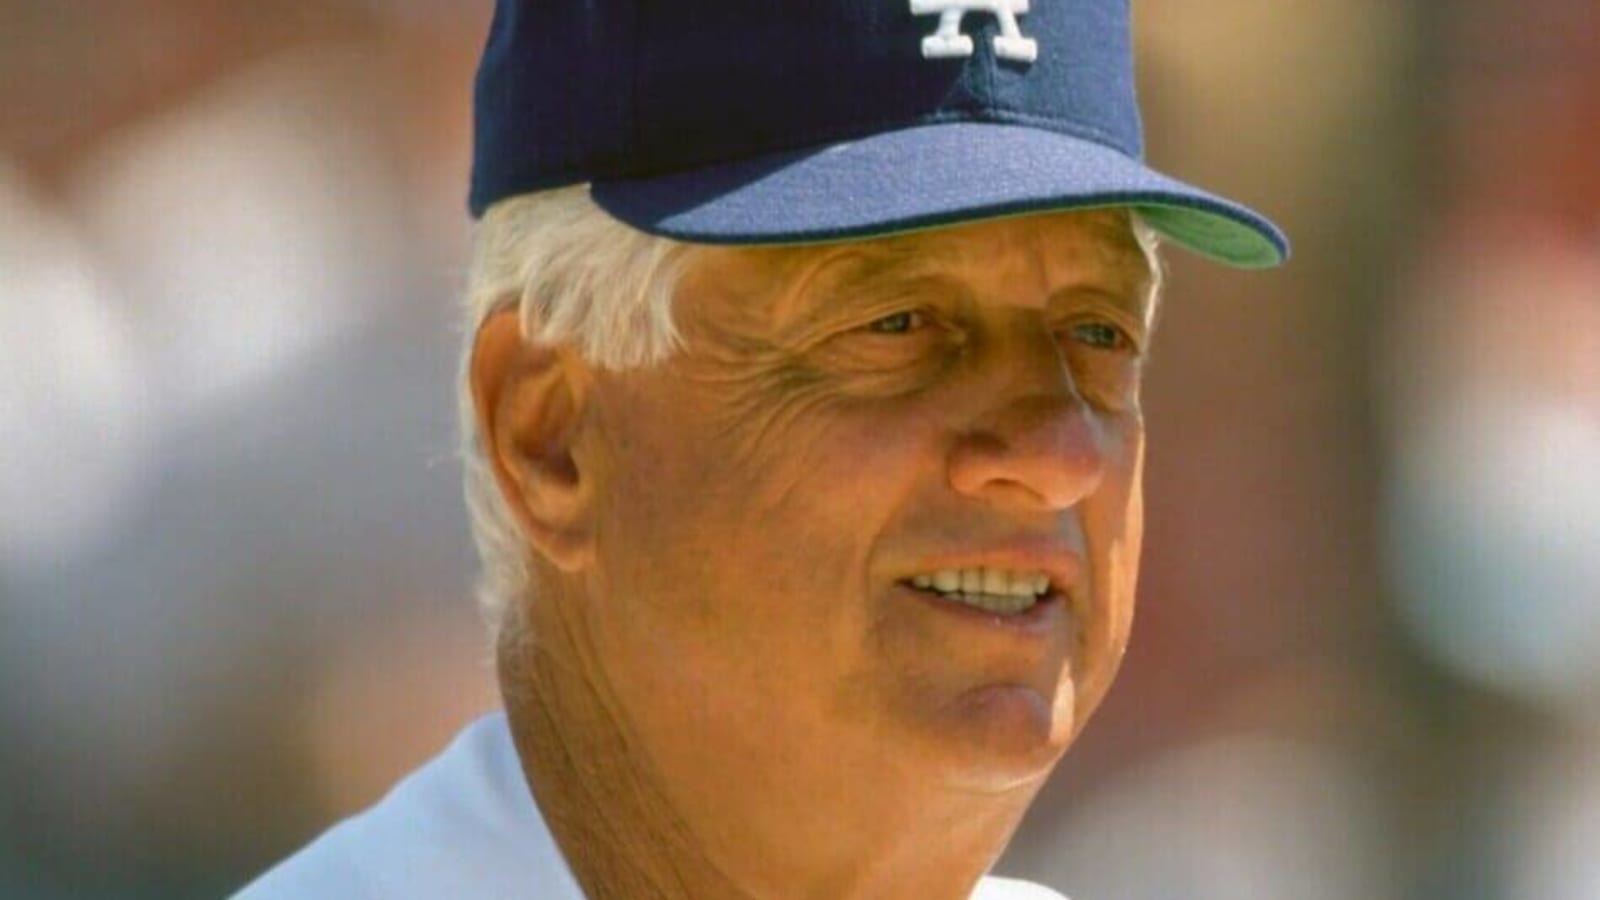  Third Annual Tommy Lasorda Day Festival Being Hosted By City of Fullerton